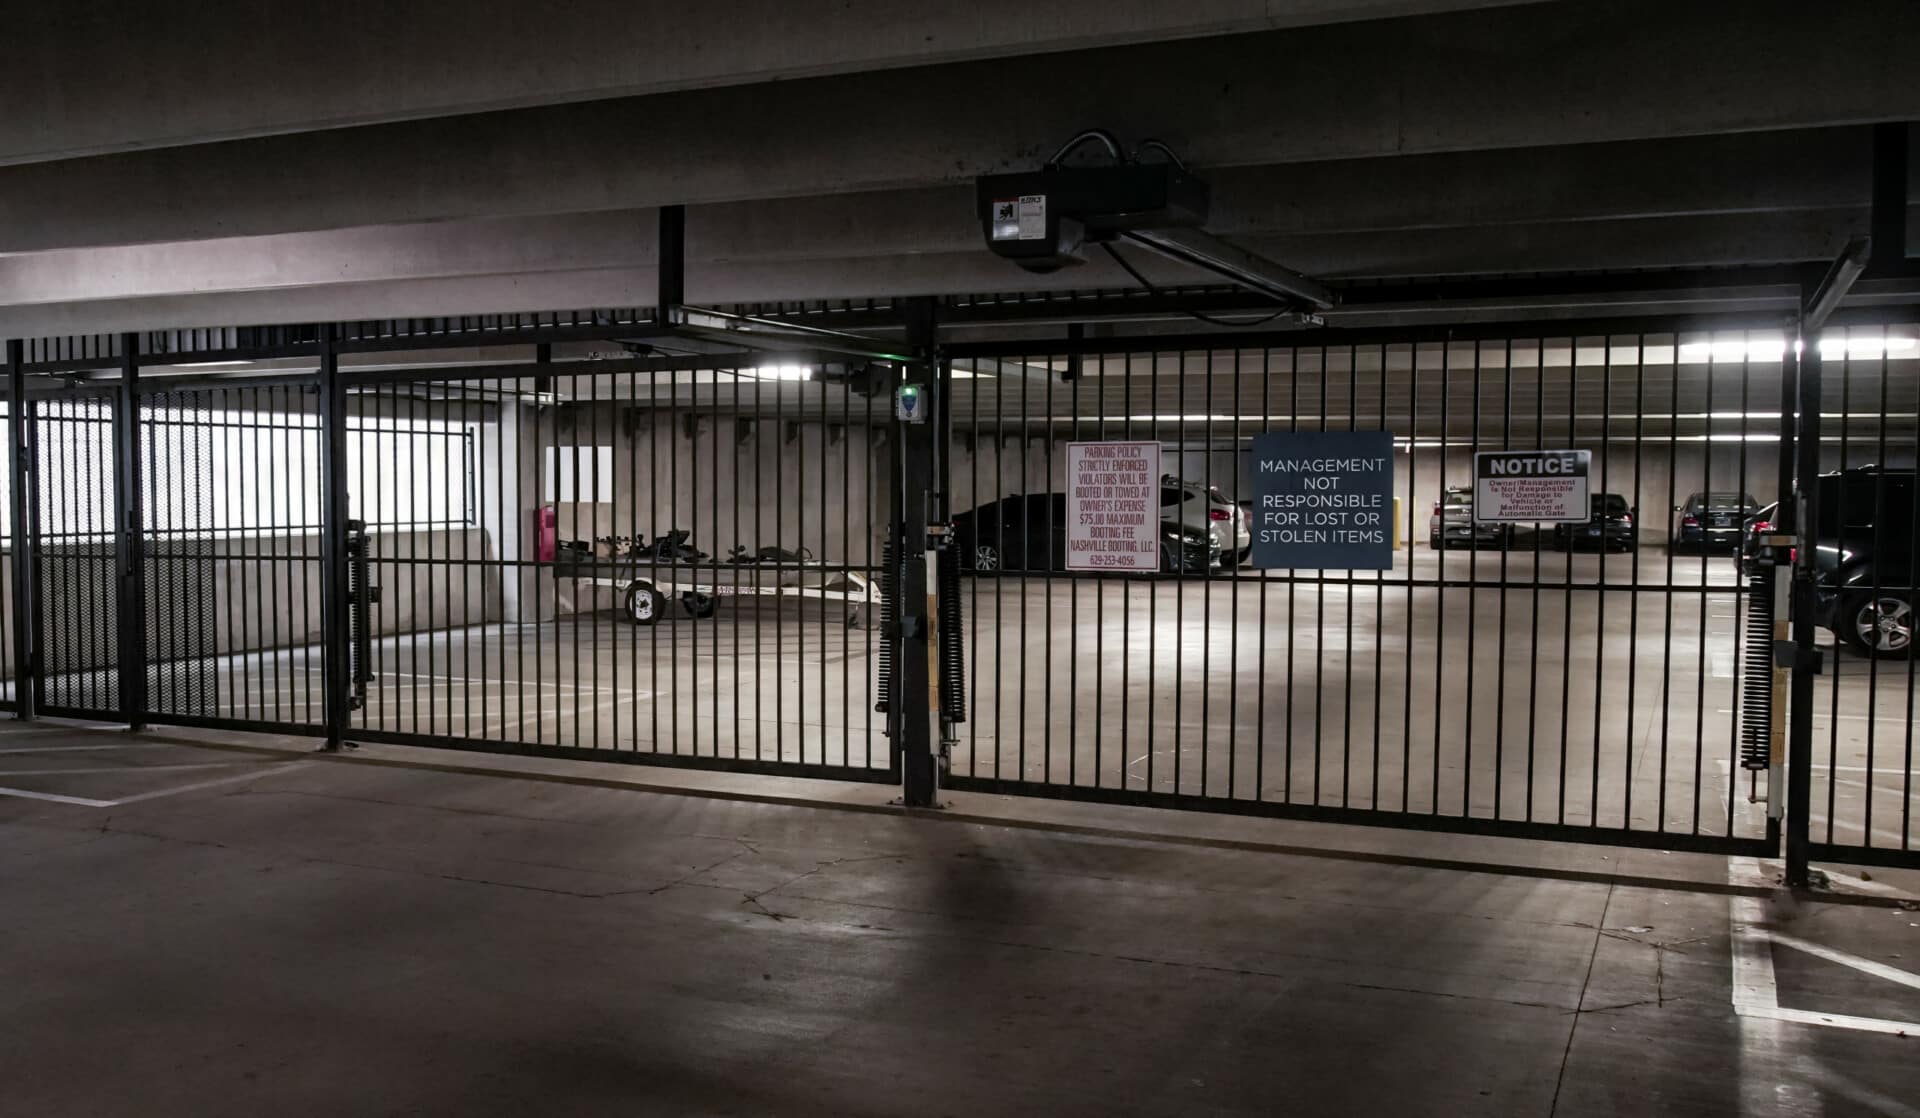 Security gate for separate parking area